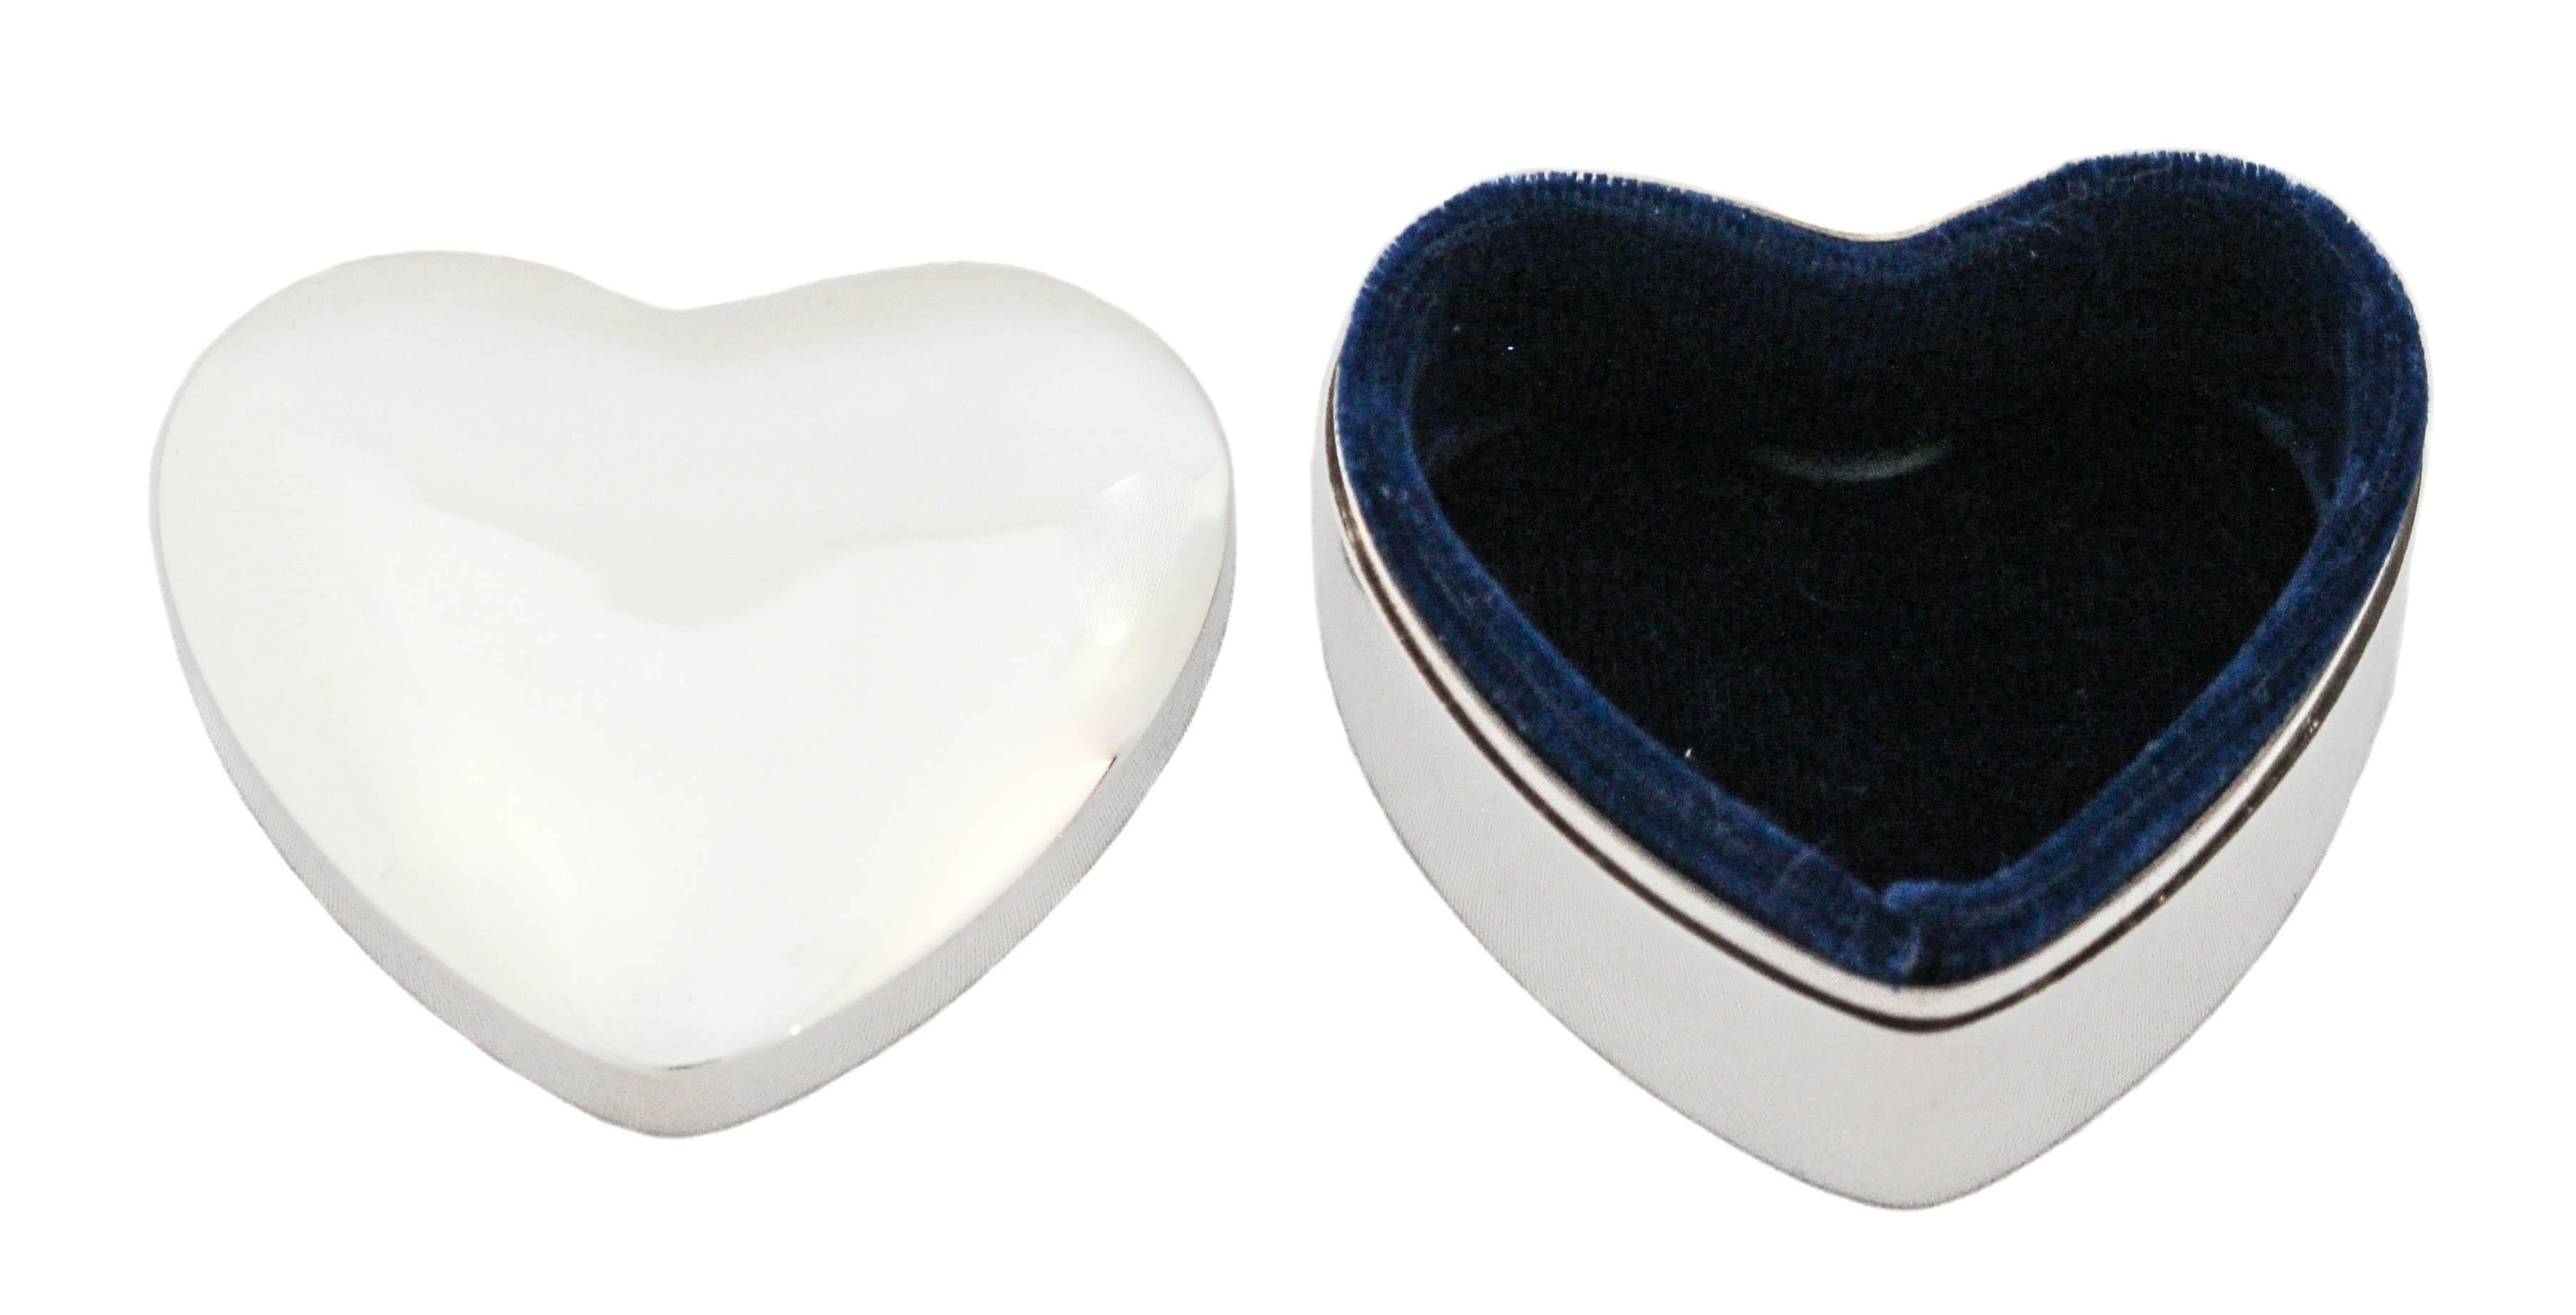 Love is in the air!! This sterling silver box is the perfect accessory for that special moment; asking the person you love “will you marry me?”
A heart-shaped ring box is the perfect accessory!!
The ring will really shine against the rich blue